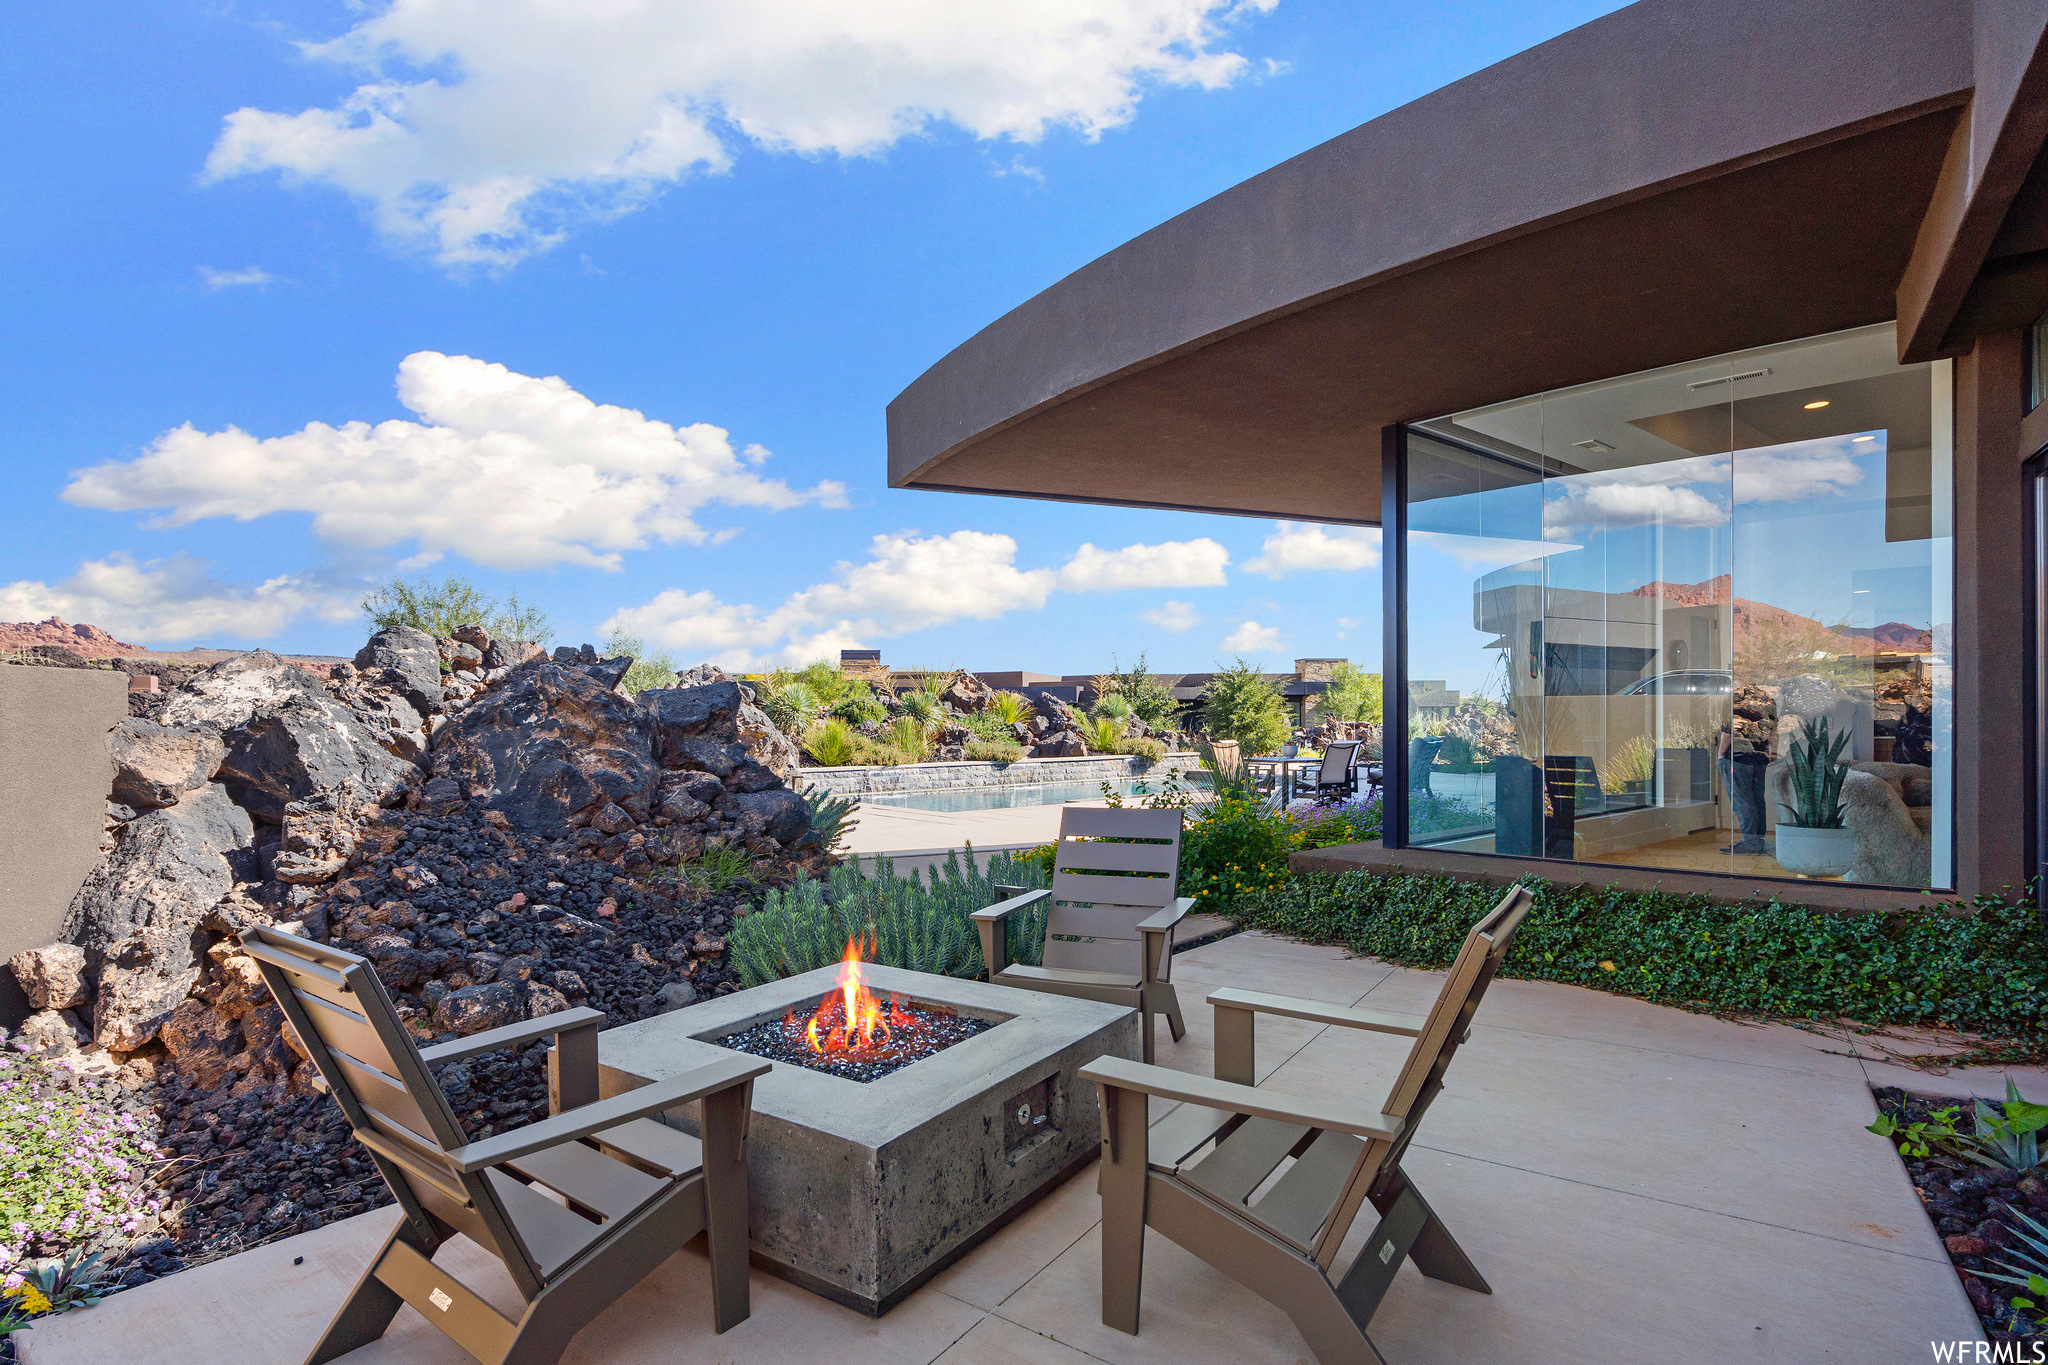 View of patio / terrace with an outdoor fire pit